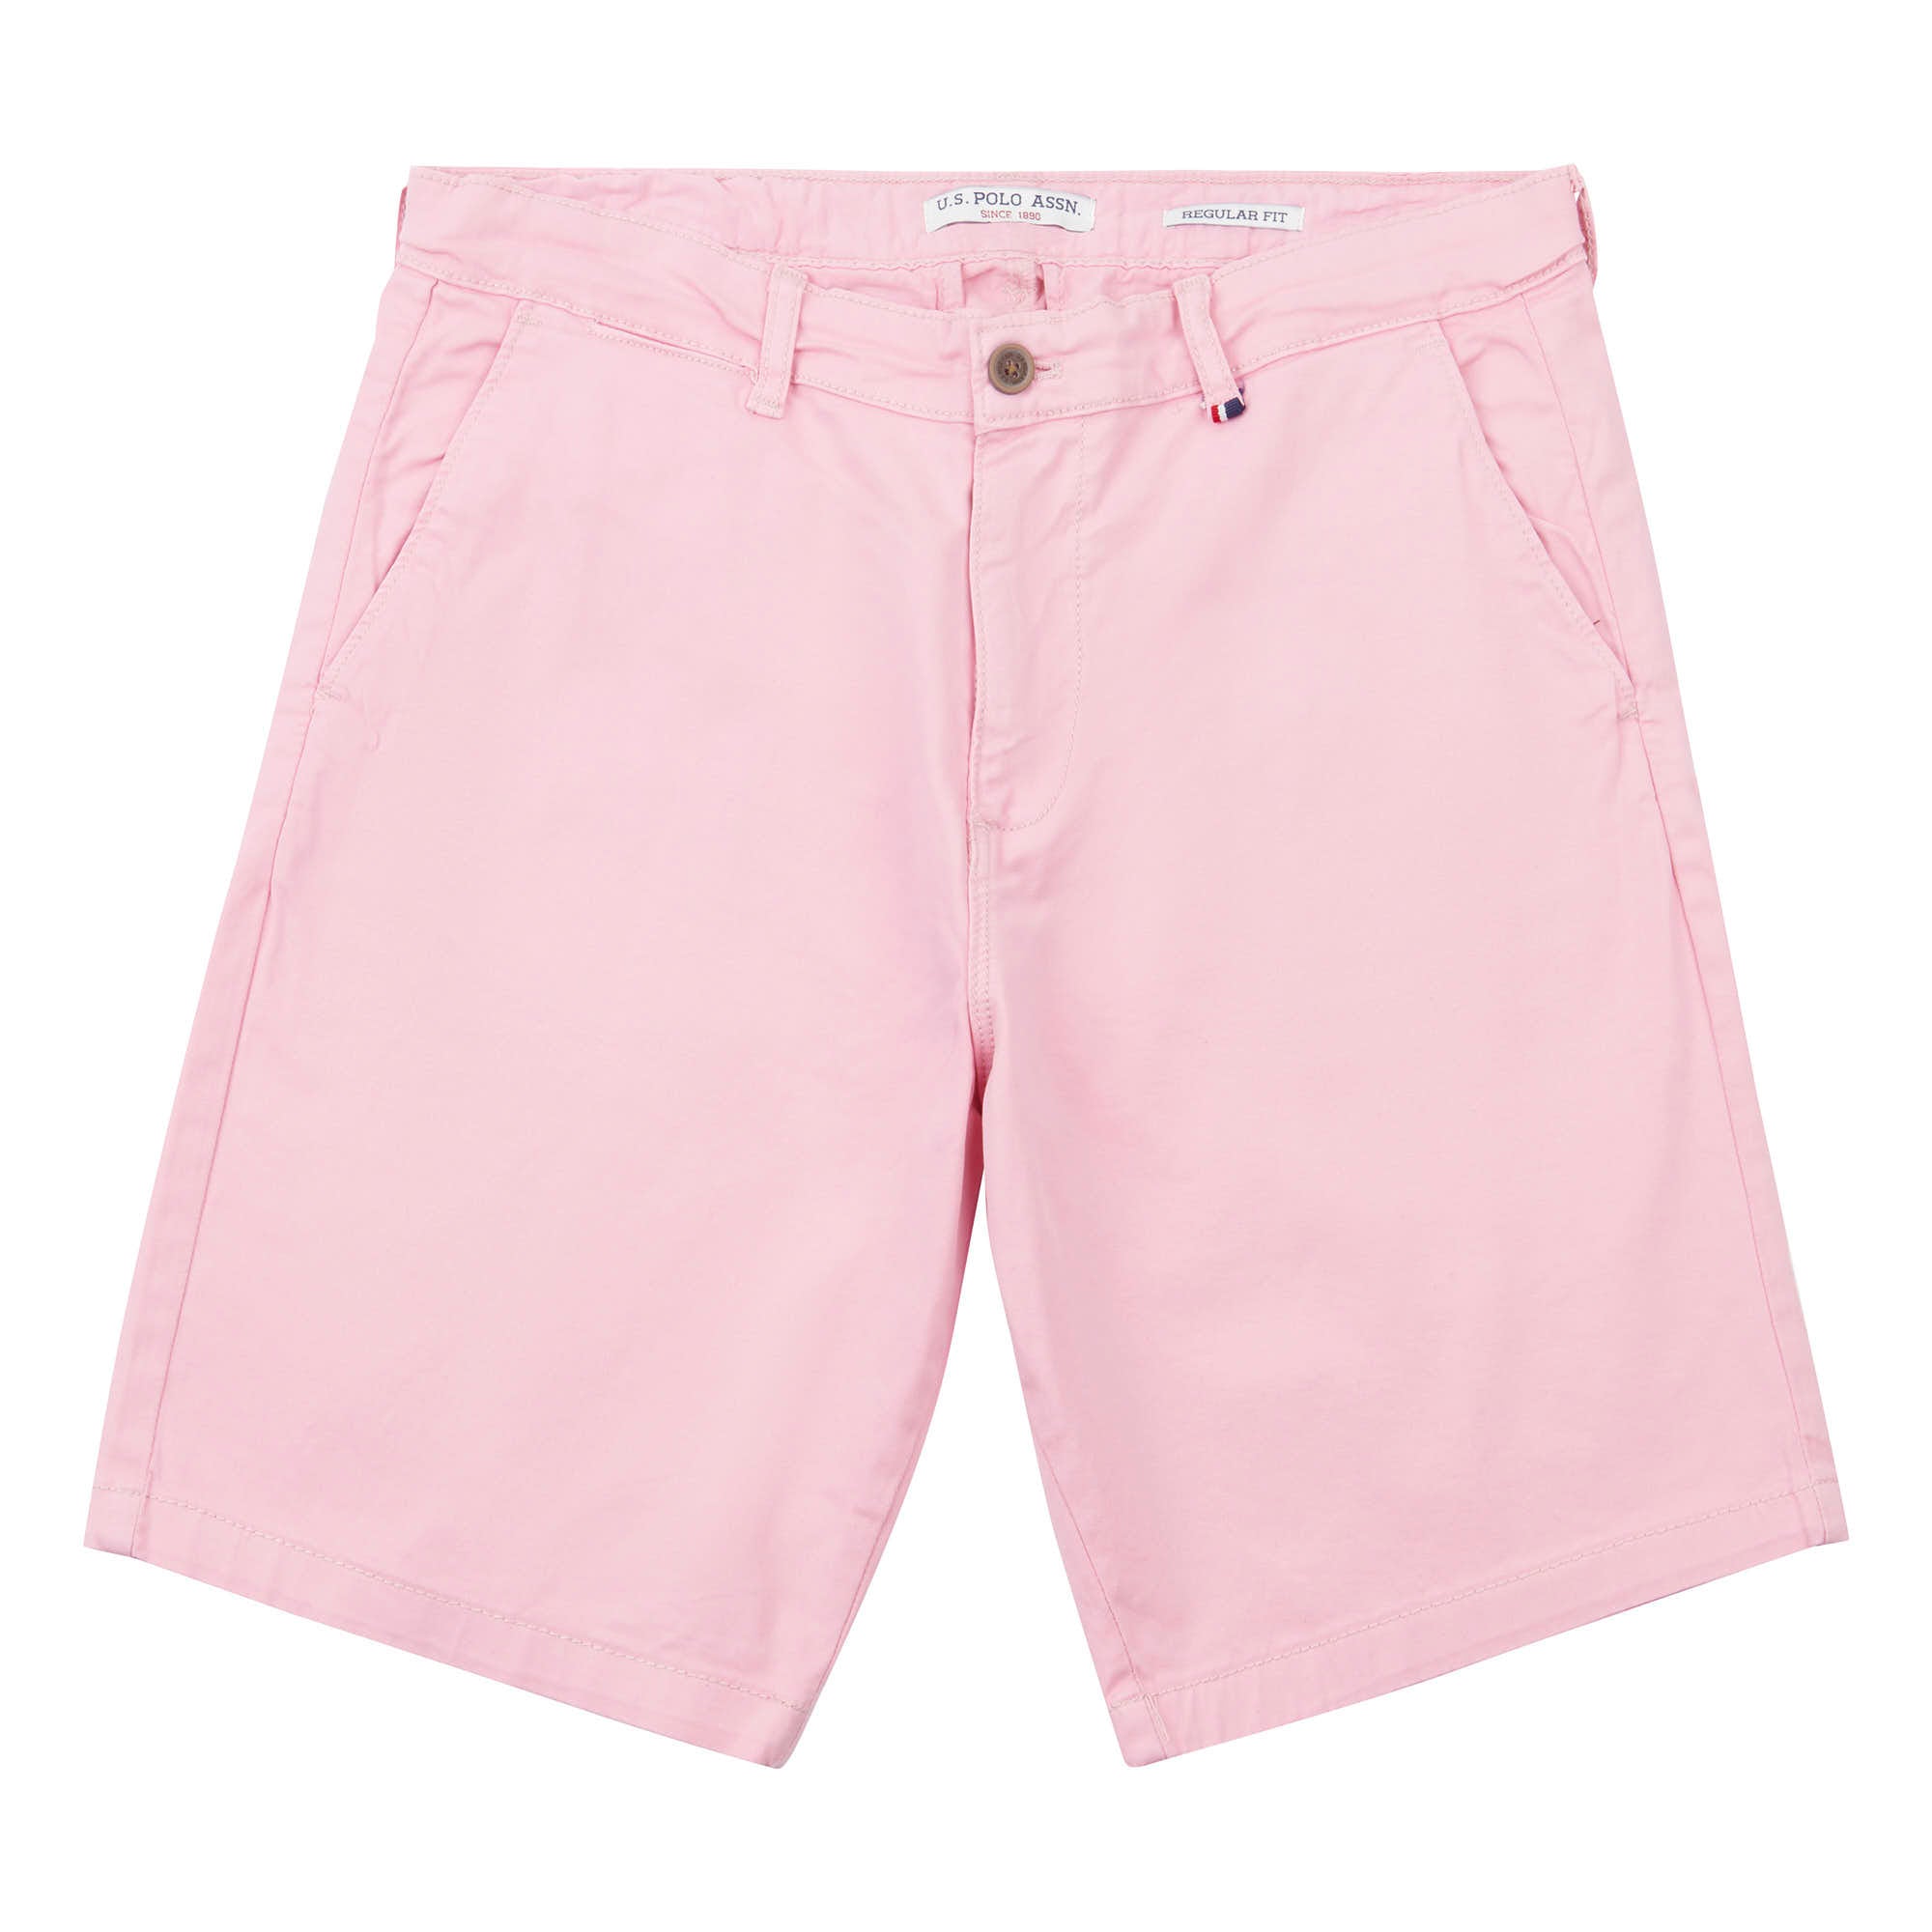 Mens Heritage Chino Shorts in Orchid Pink